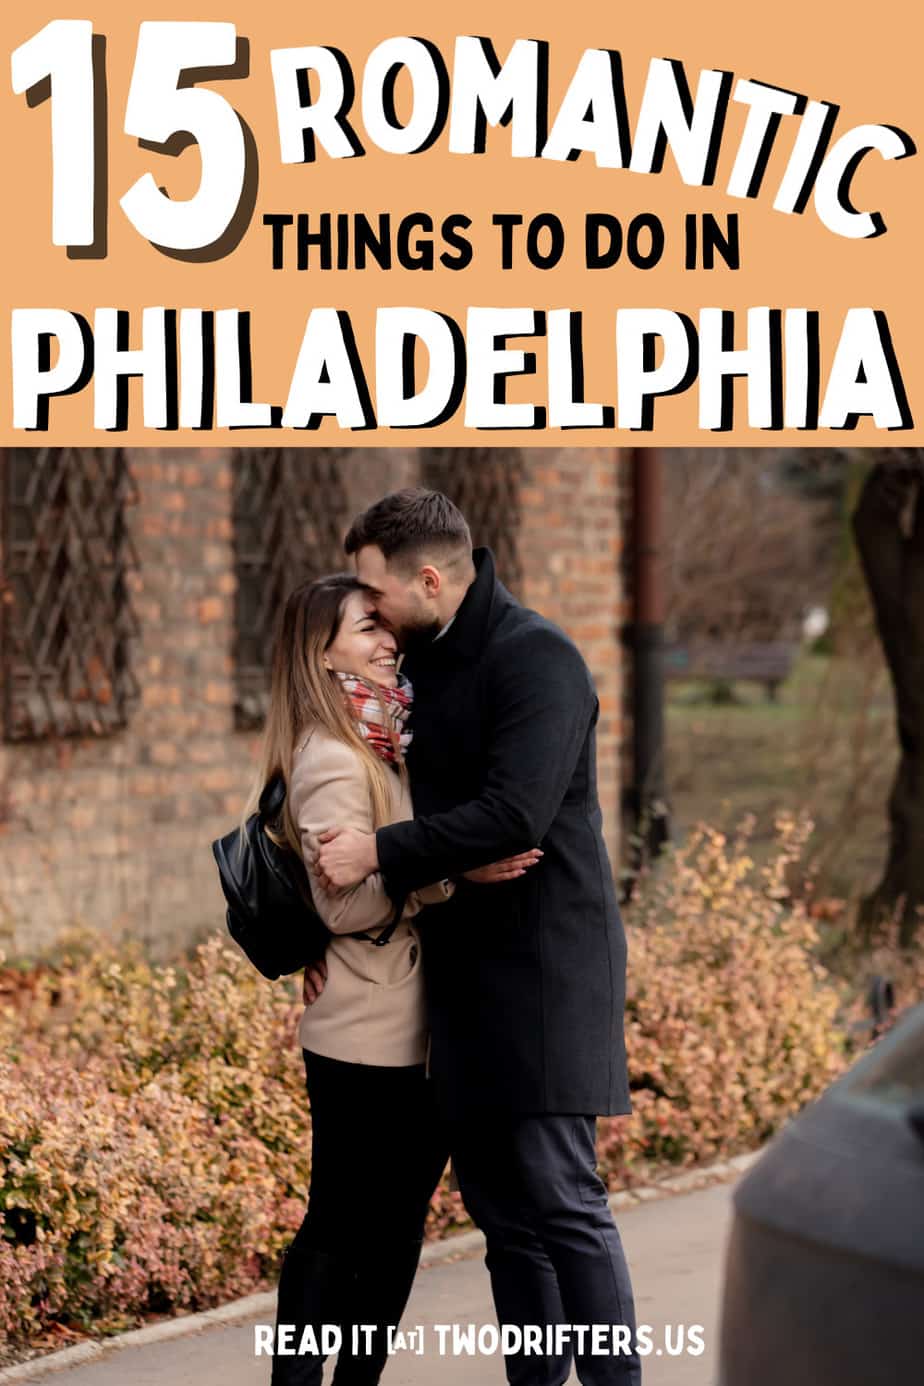 Pinterest social share image that says "15 Romantic Things to do in Philadelphia."